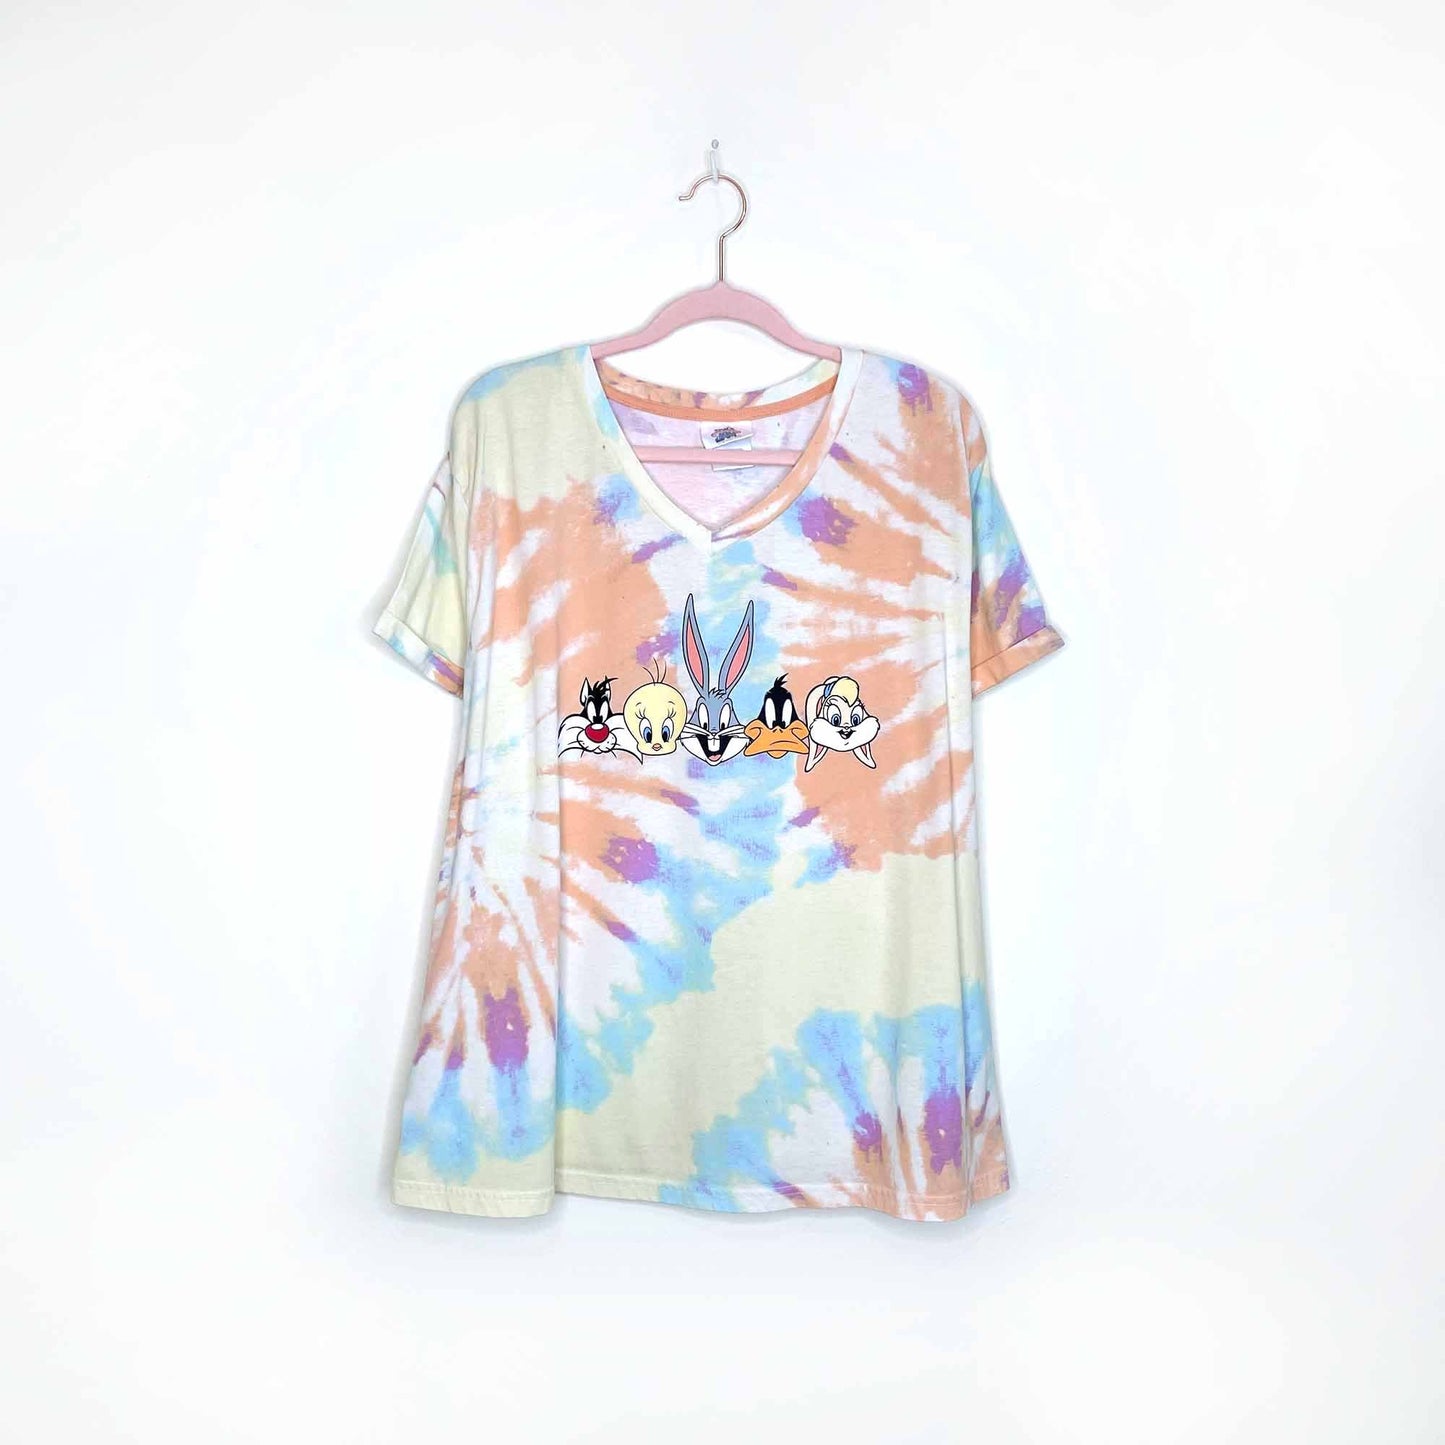 space jams tie-dye rolled sleeve graphic tee - size 2xl